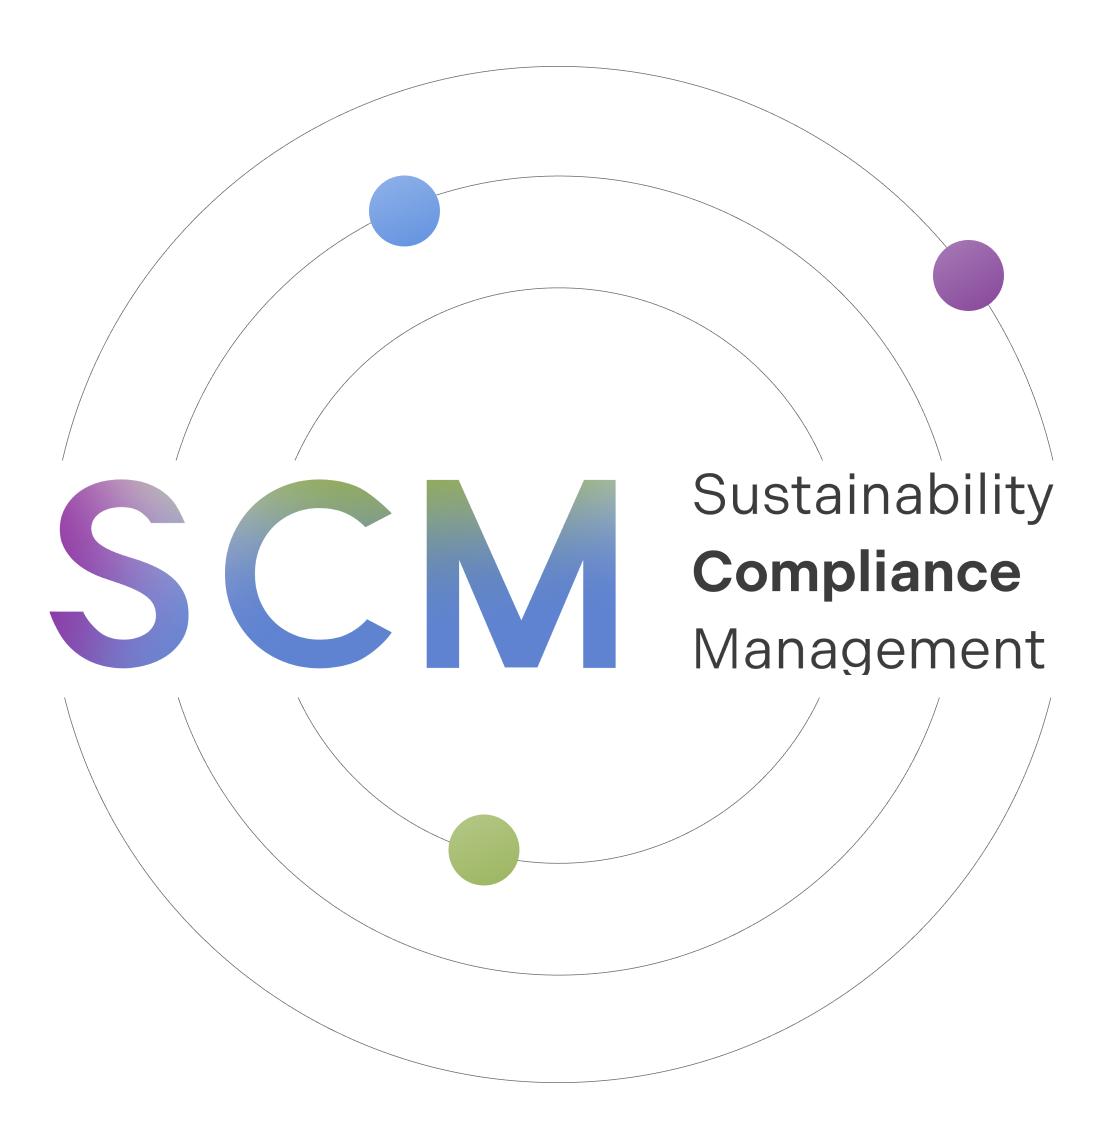 Sustainability Compliance Management with the Sustainability OS of GLOSUS